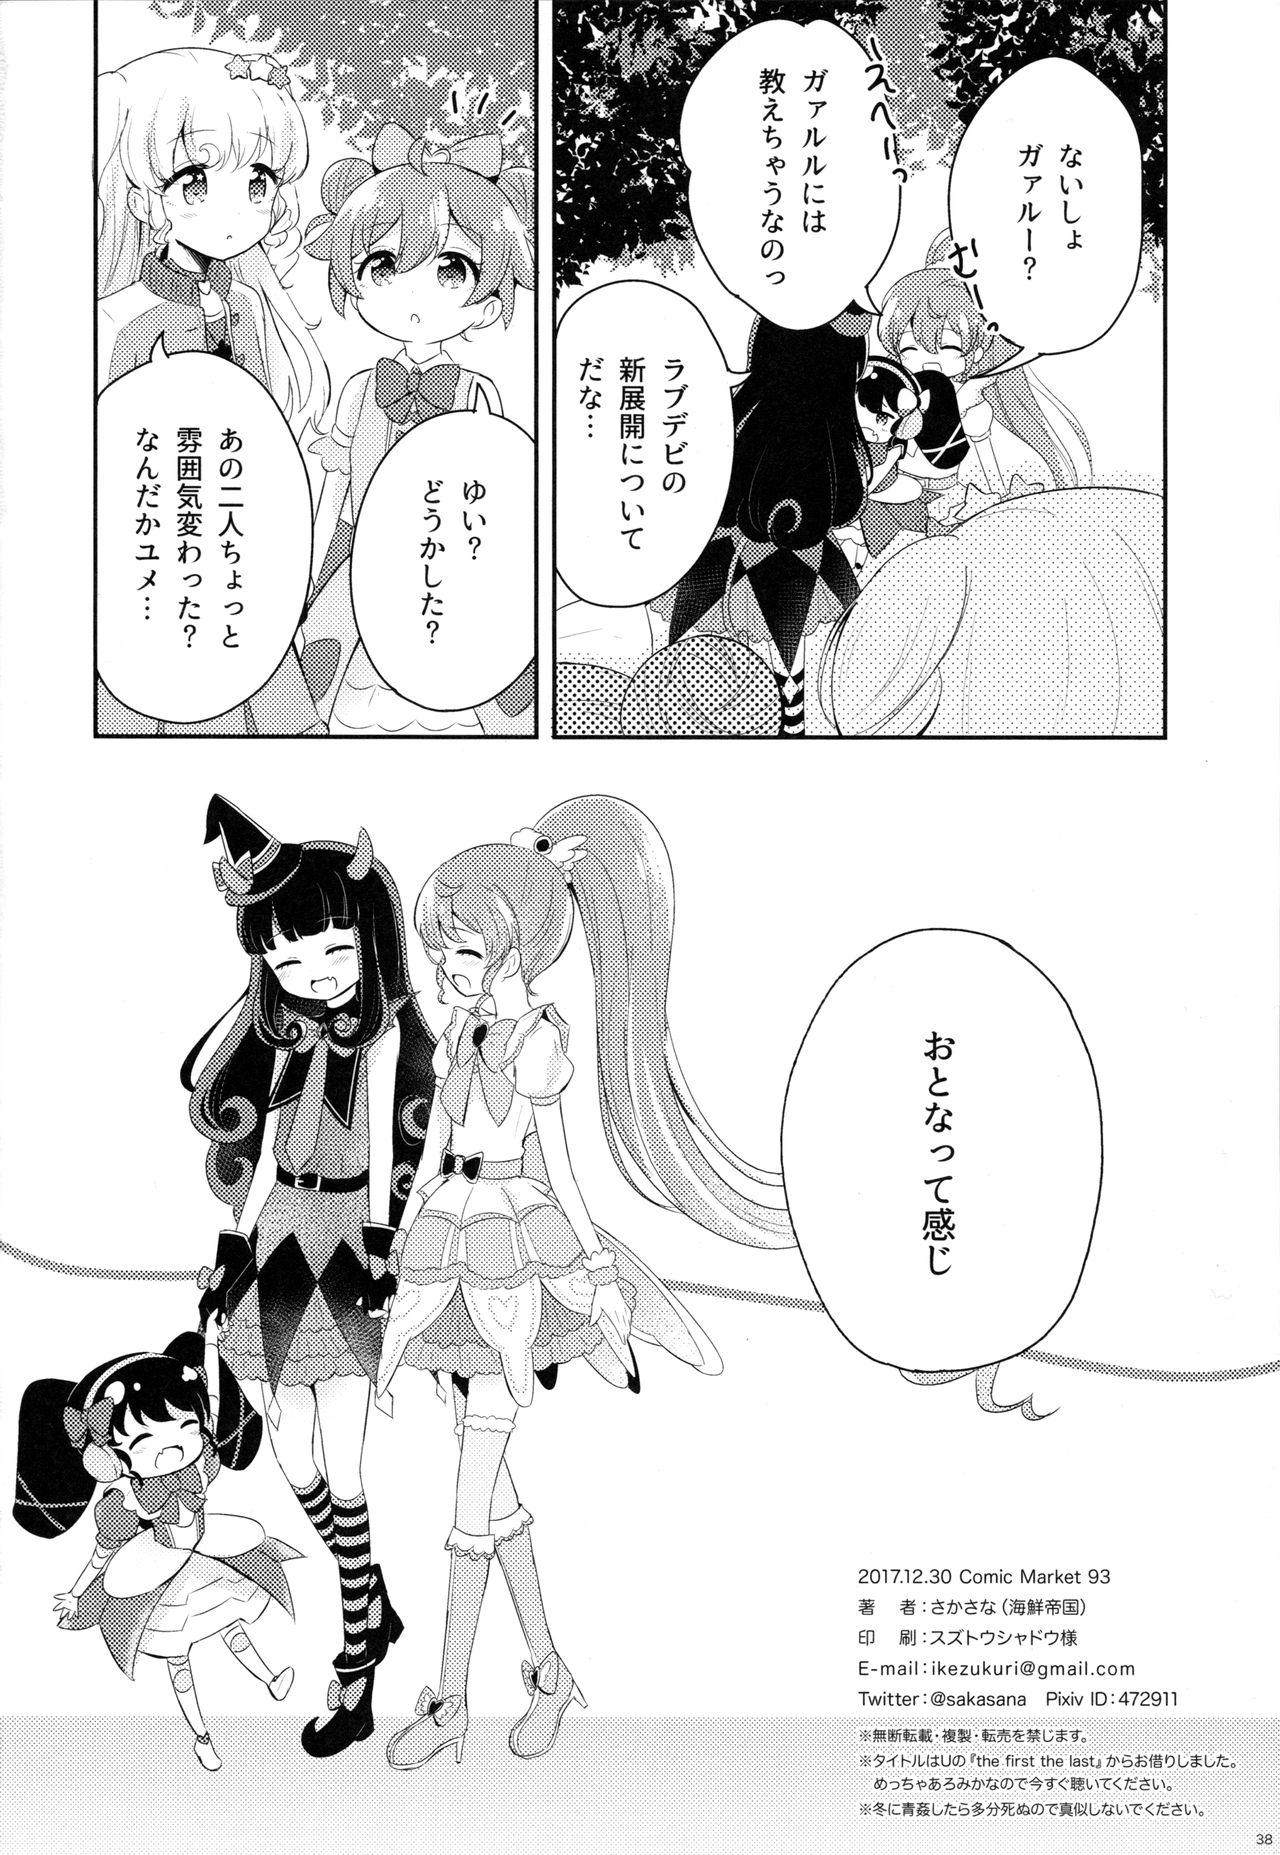 Teasing The First The Last. - Pripara Step Fantasy - Page 40